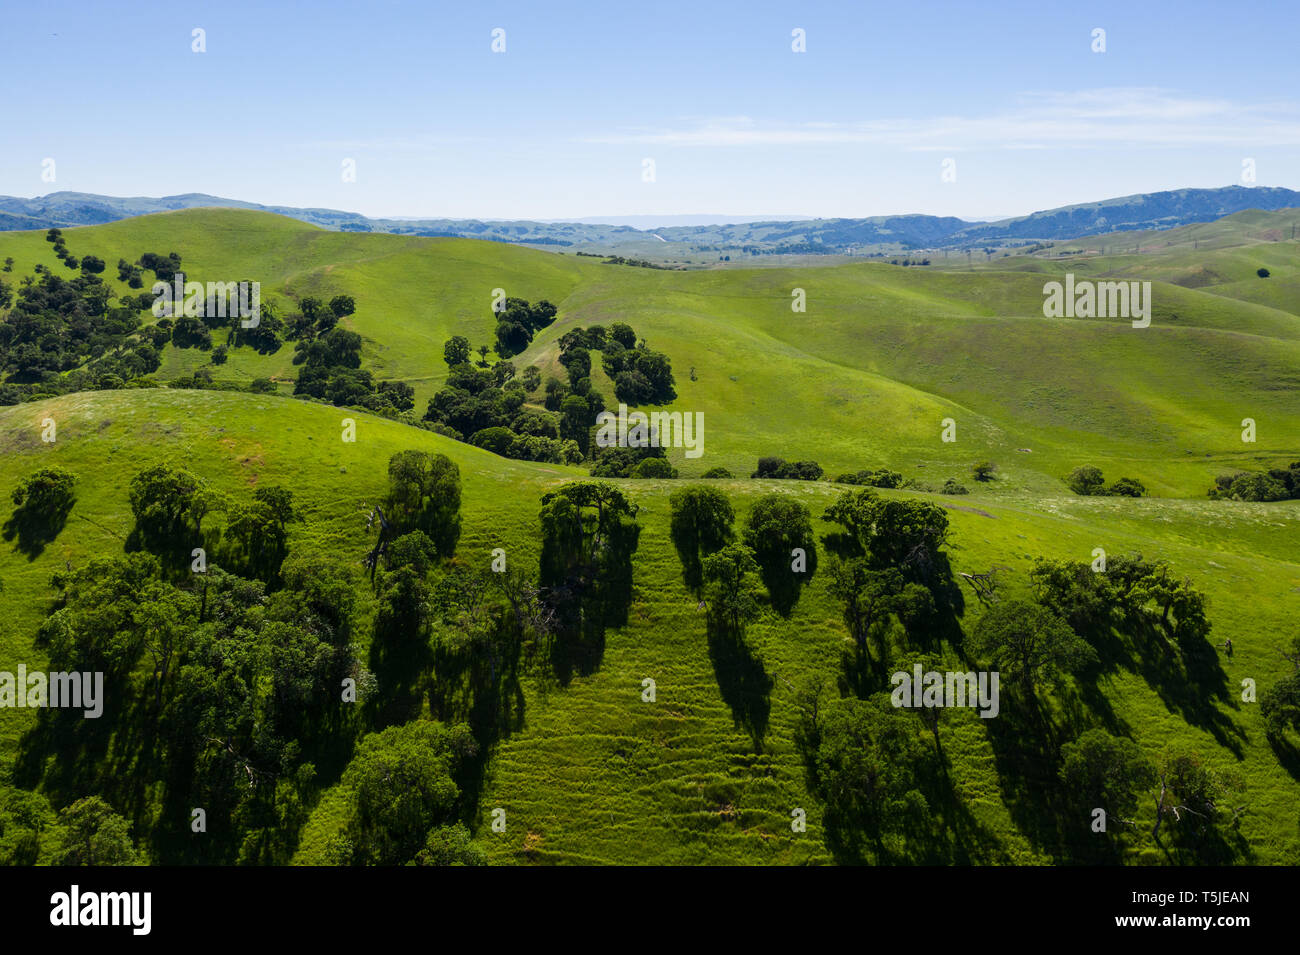 An aerial view of rolling hills in Northern California's tri-valley region shows lush, green grass that flourished after a wet winter. Stock Photo